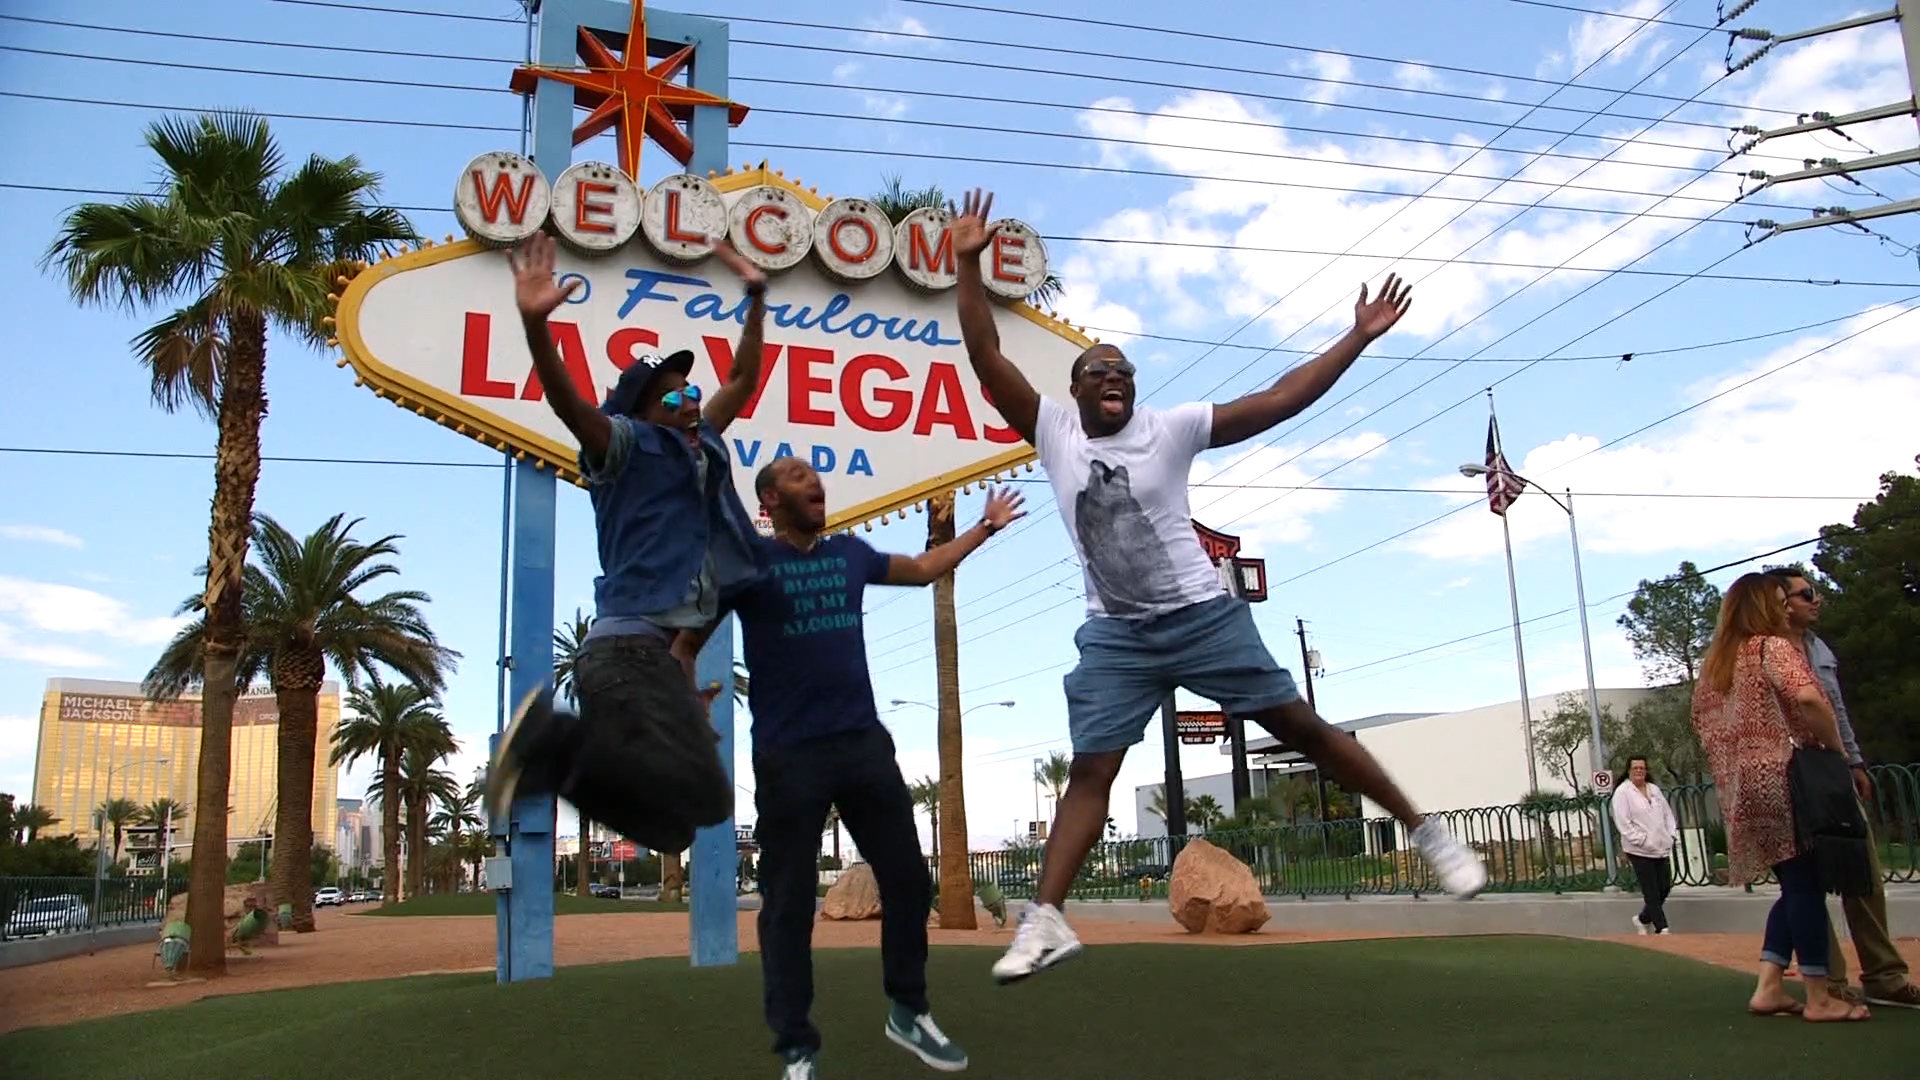 Anthony and friends jumping in front of Las Vegas sign (1).jpg